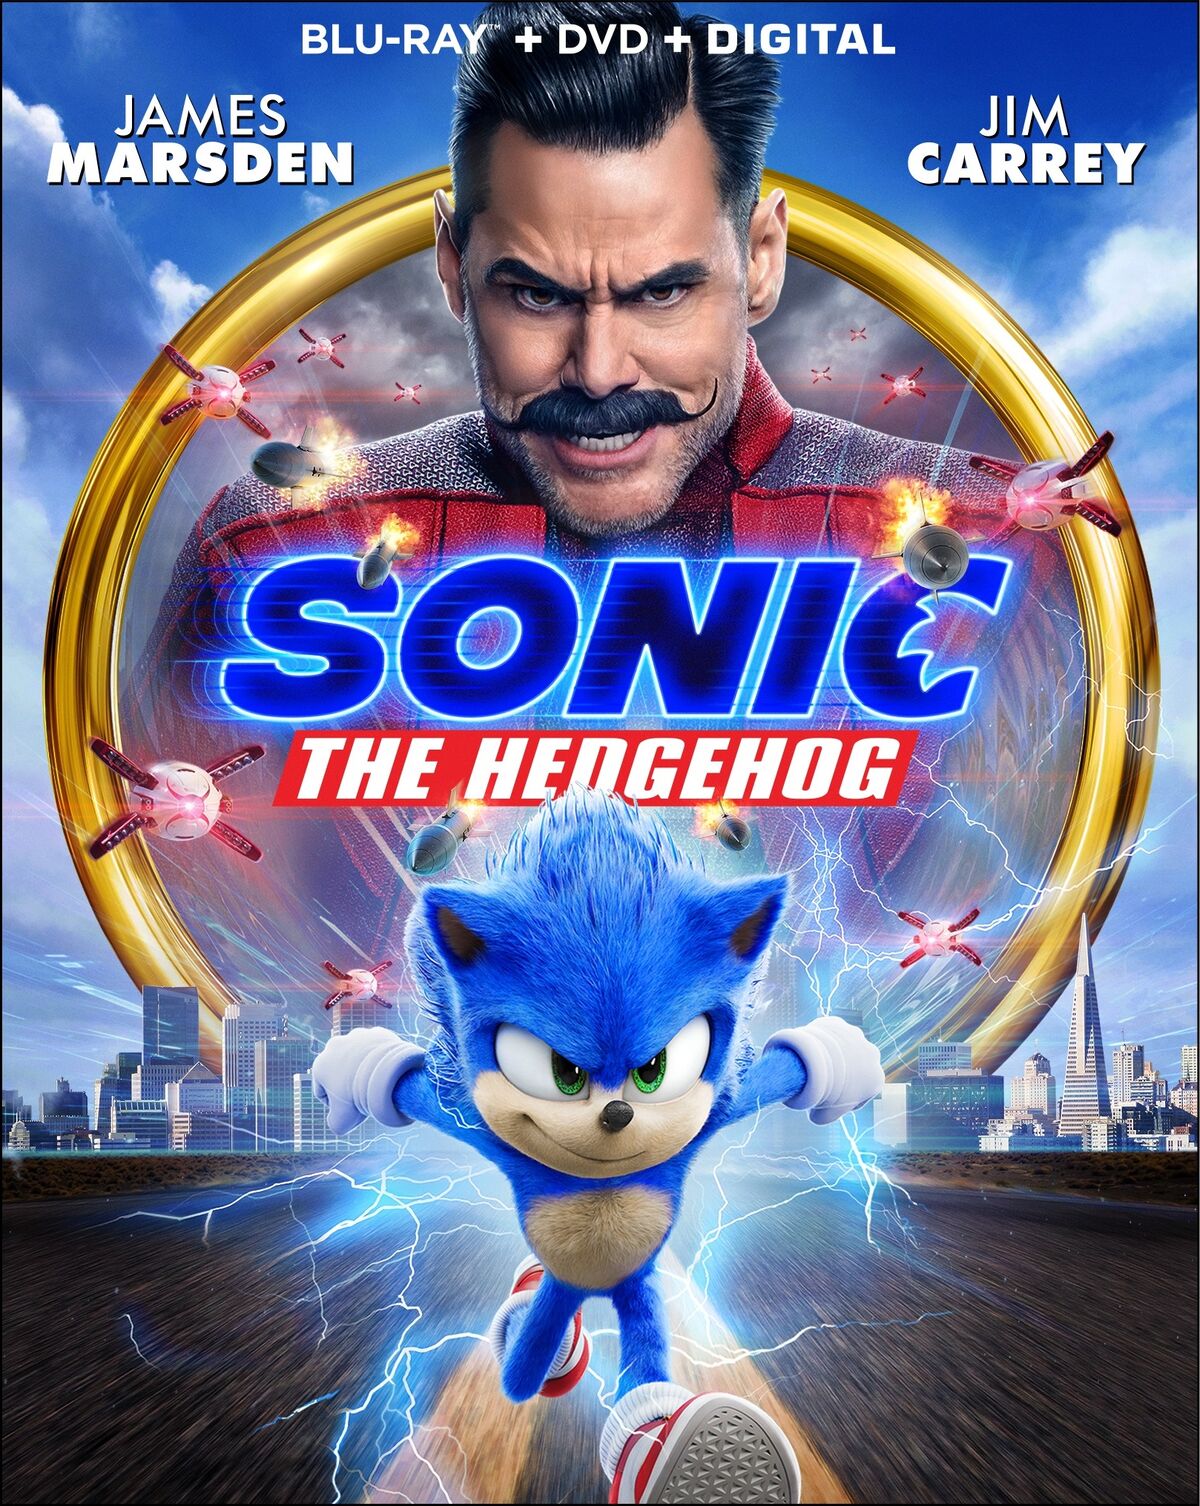 Sonic the Hedgehog (film)/Gallery | The JH Movie Collection's Official ...